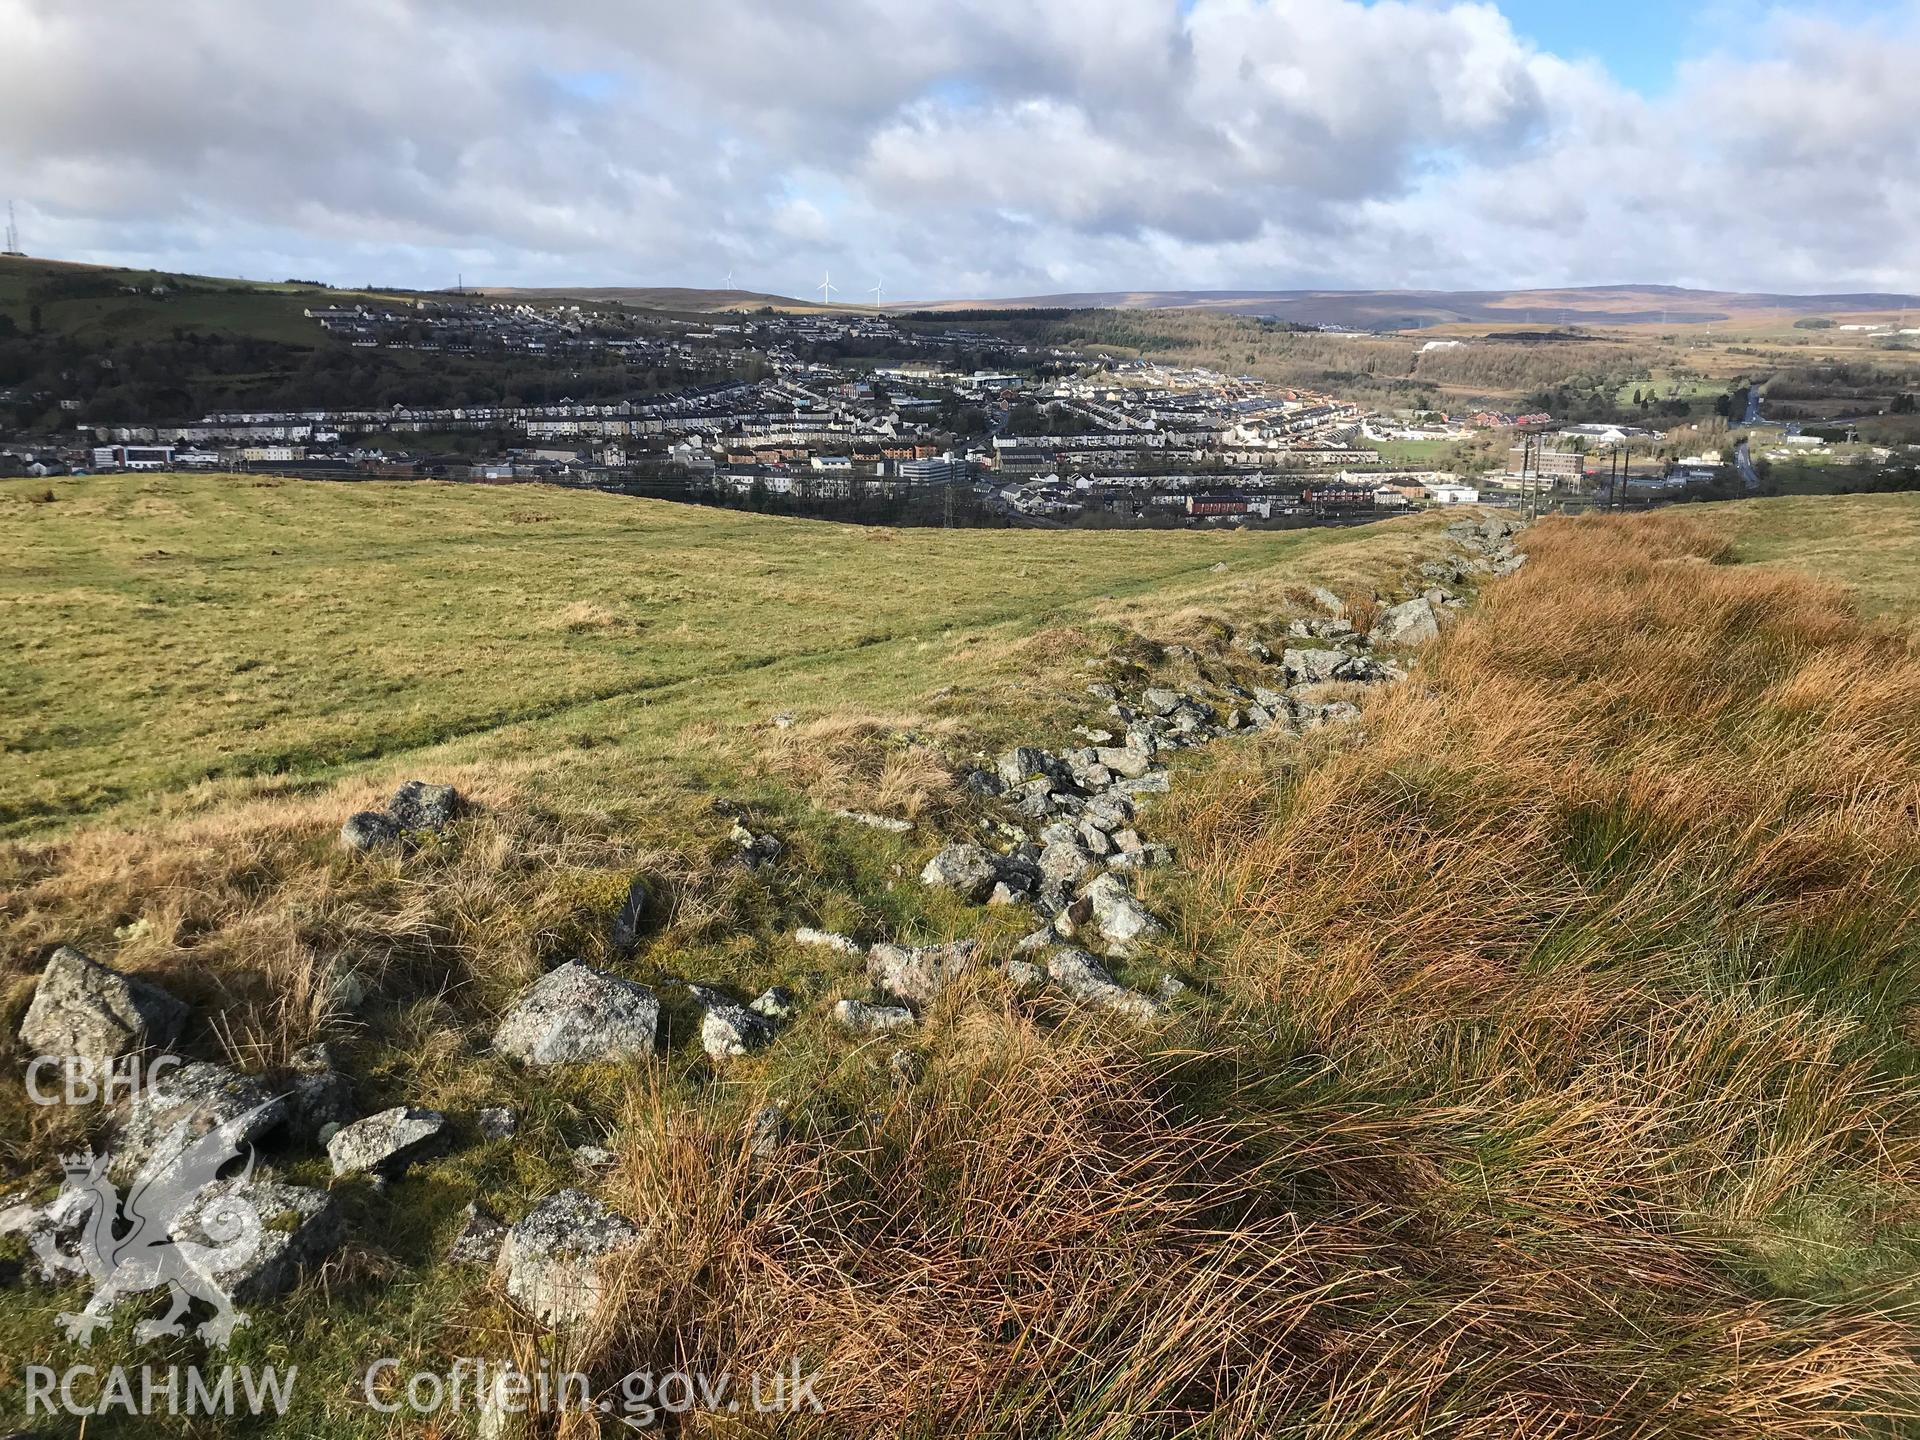 Colour photograph of boundary wall of house platform and field system at Bwlch y Garn, Ebbw Vale, taken by Paul R. Davis on 17th March 2019.